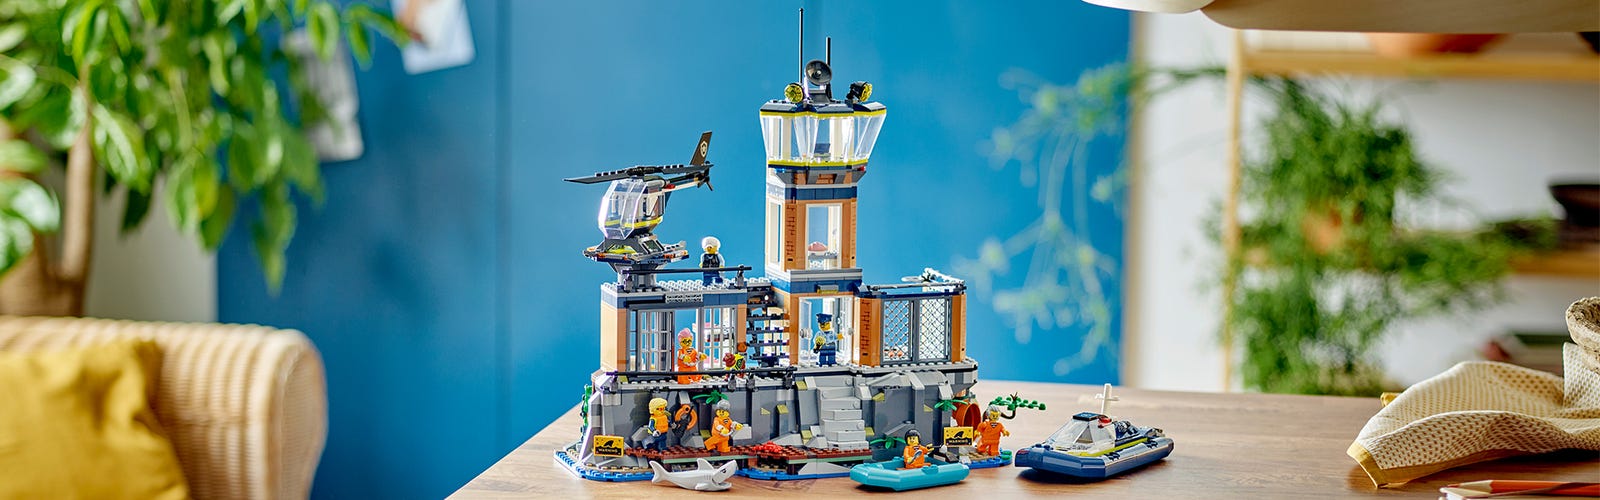 Find amazing products in LEGO City today